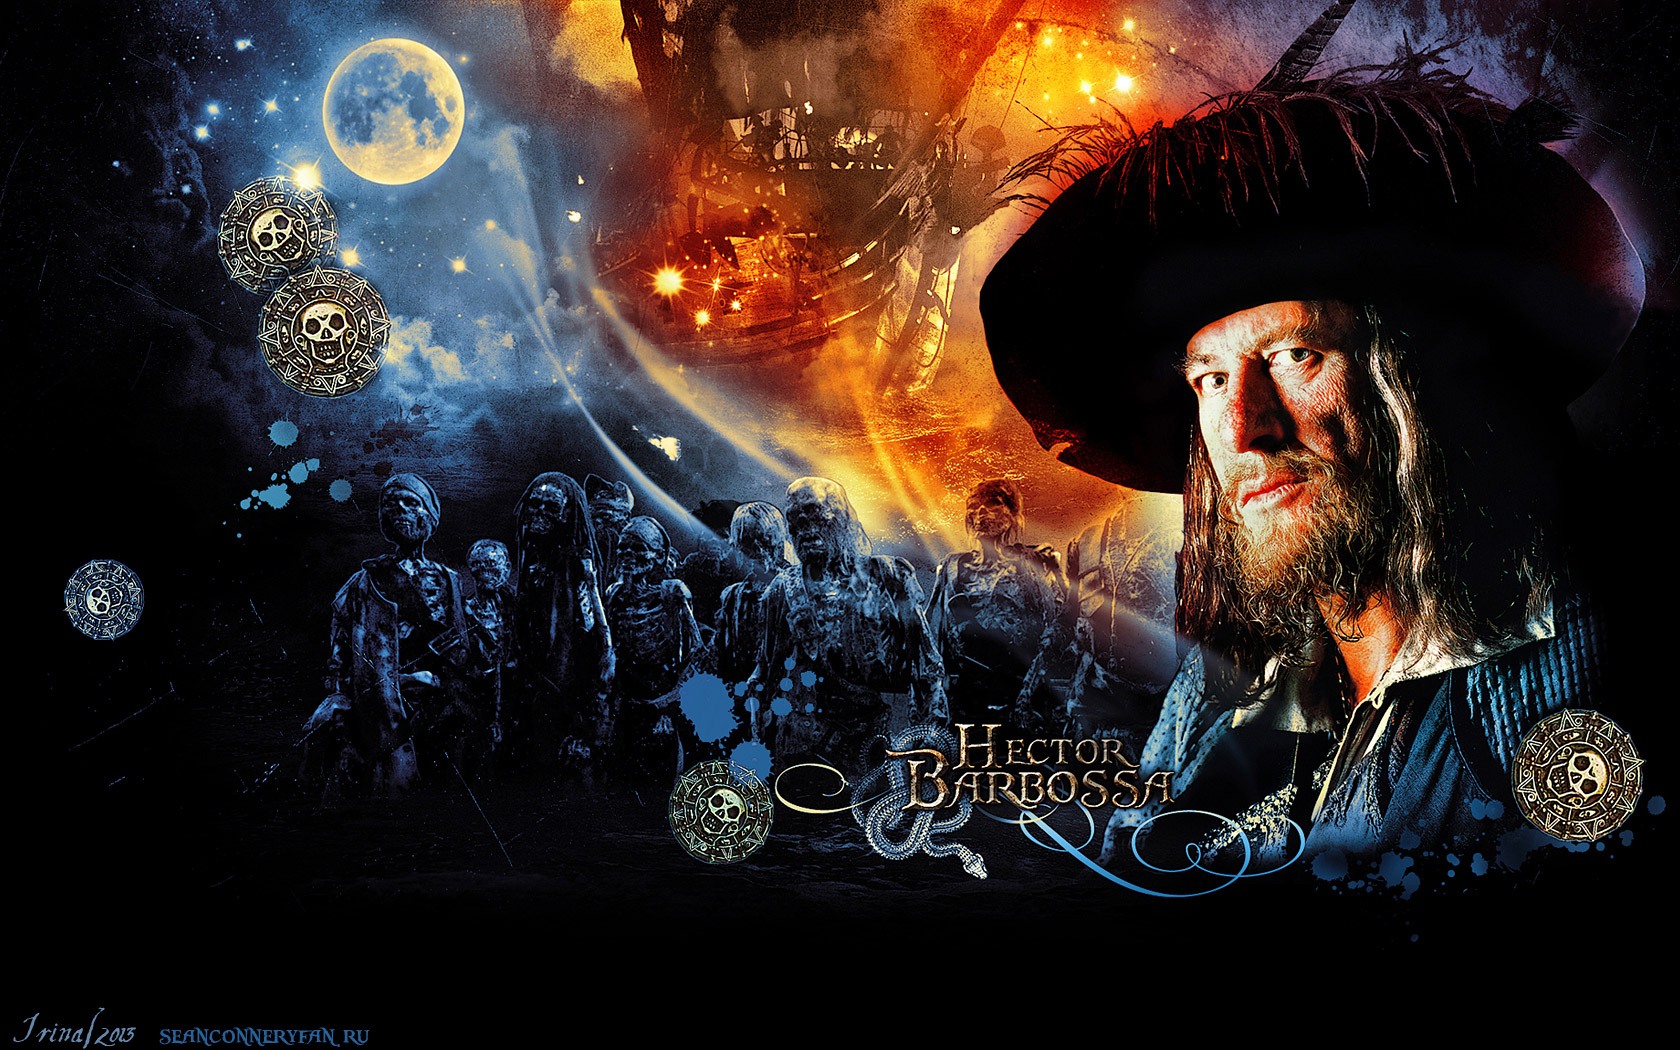   .    (Pirates of the Caribbean. The Curse of the Black Pearl),   (Geoffrey Rush)  Wallpaper